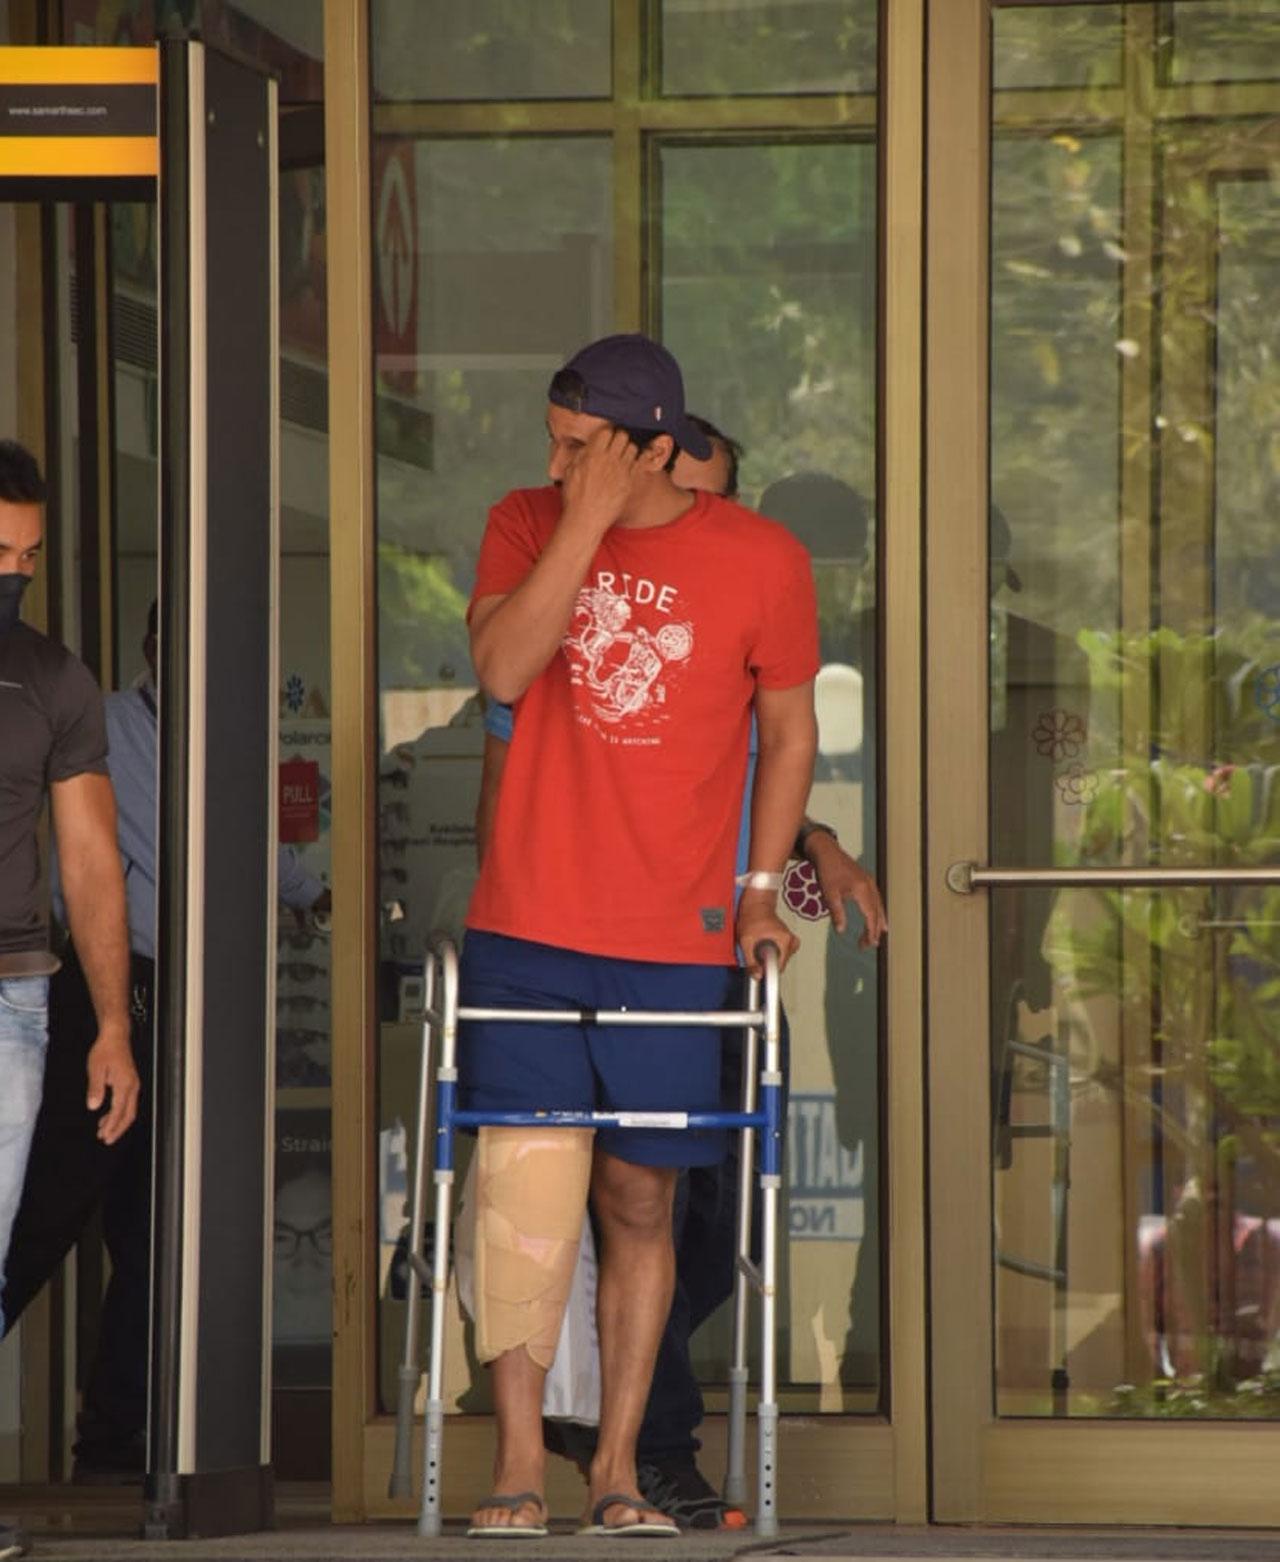 Randeep Hooda, earlier today, was discharged from Kokilaben hospital post his knee surgery. He was spotted outside where he was waiting for his car. He was seen sporting a casual red T-shrit and a pair of shorts. 